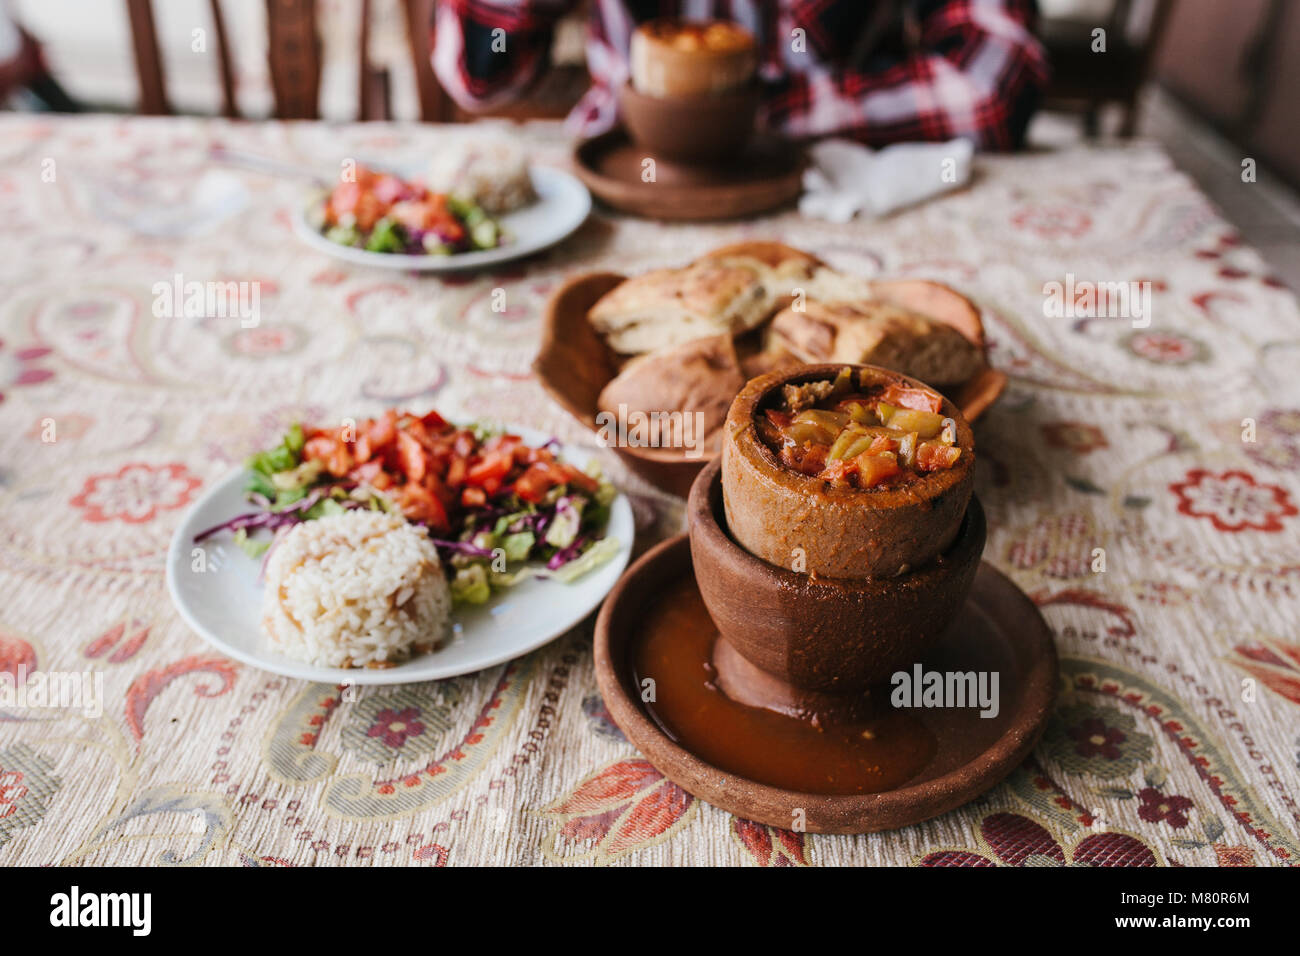 The national Turkish dish in the pot that is broken before use is called Testi-kebab. Stock Photo